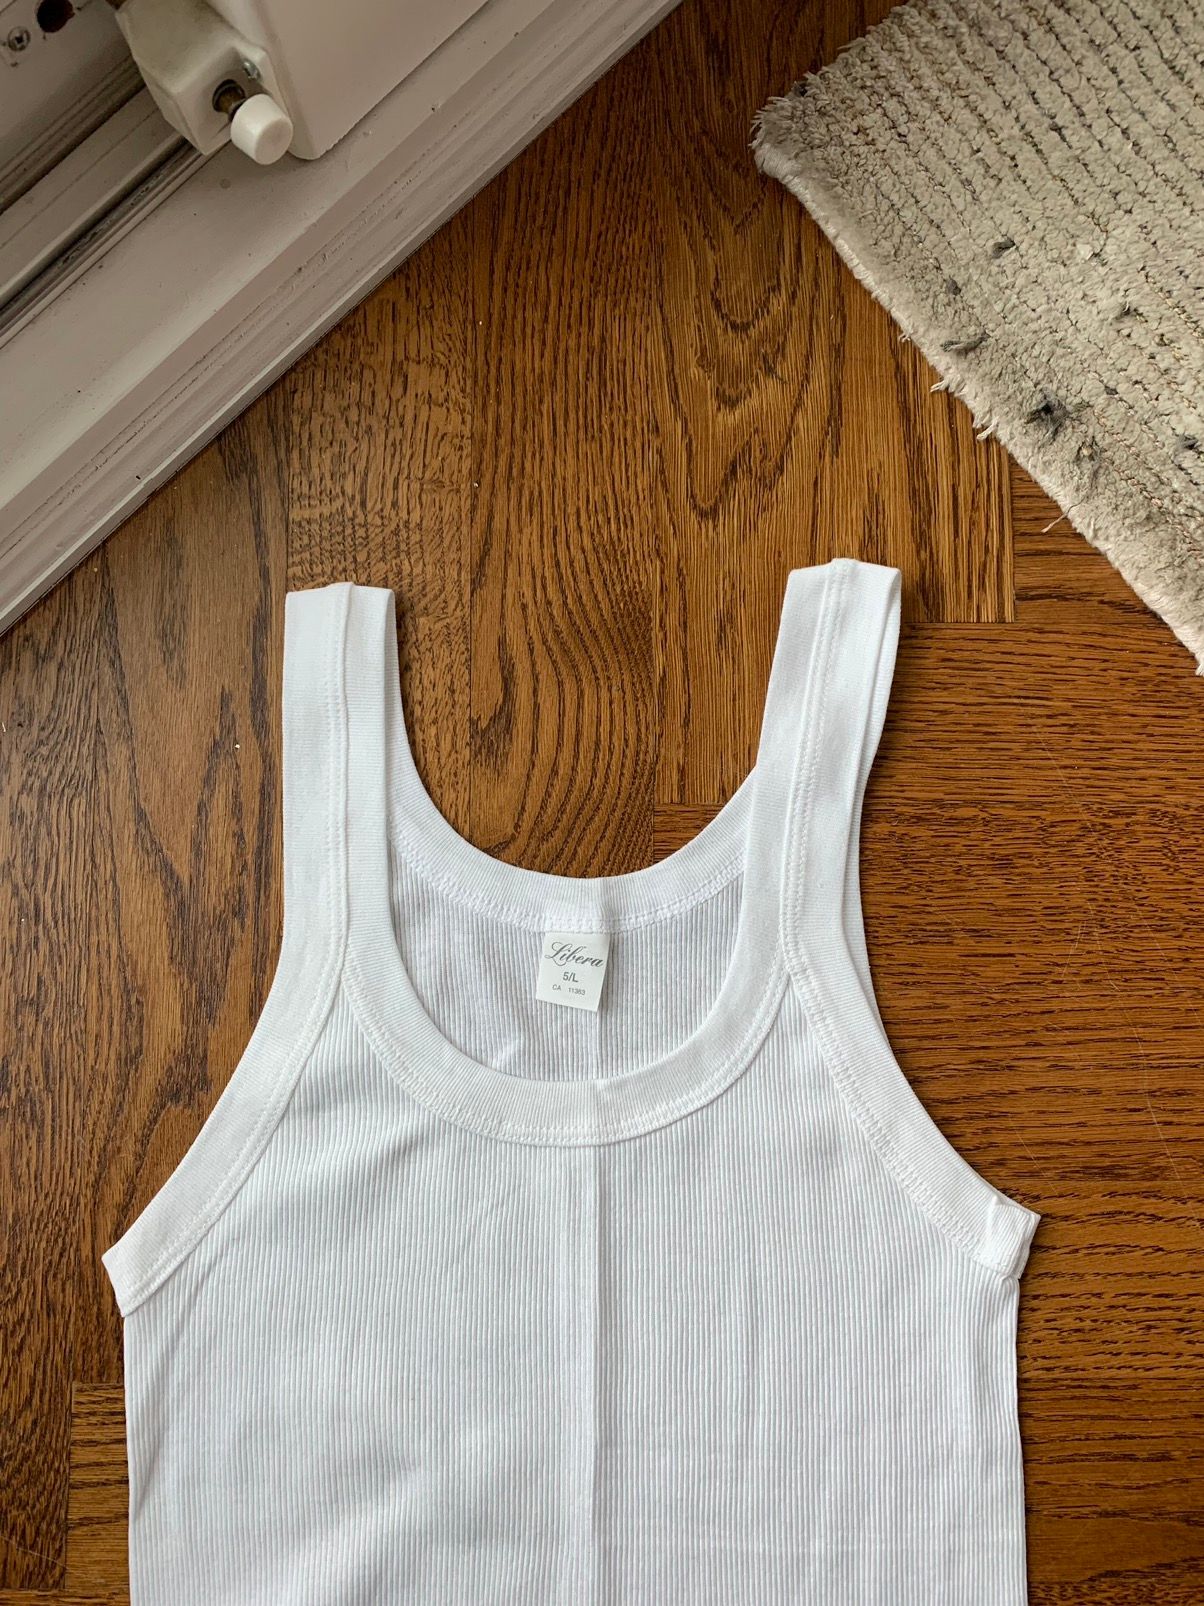 Pre-owned Archival Clothing Vintage Italian Cotton Wife Beater Tank Top Undershirt L In White